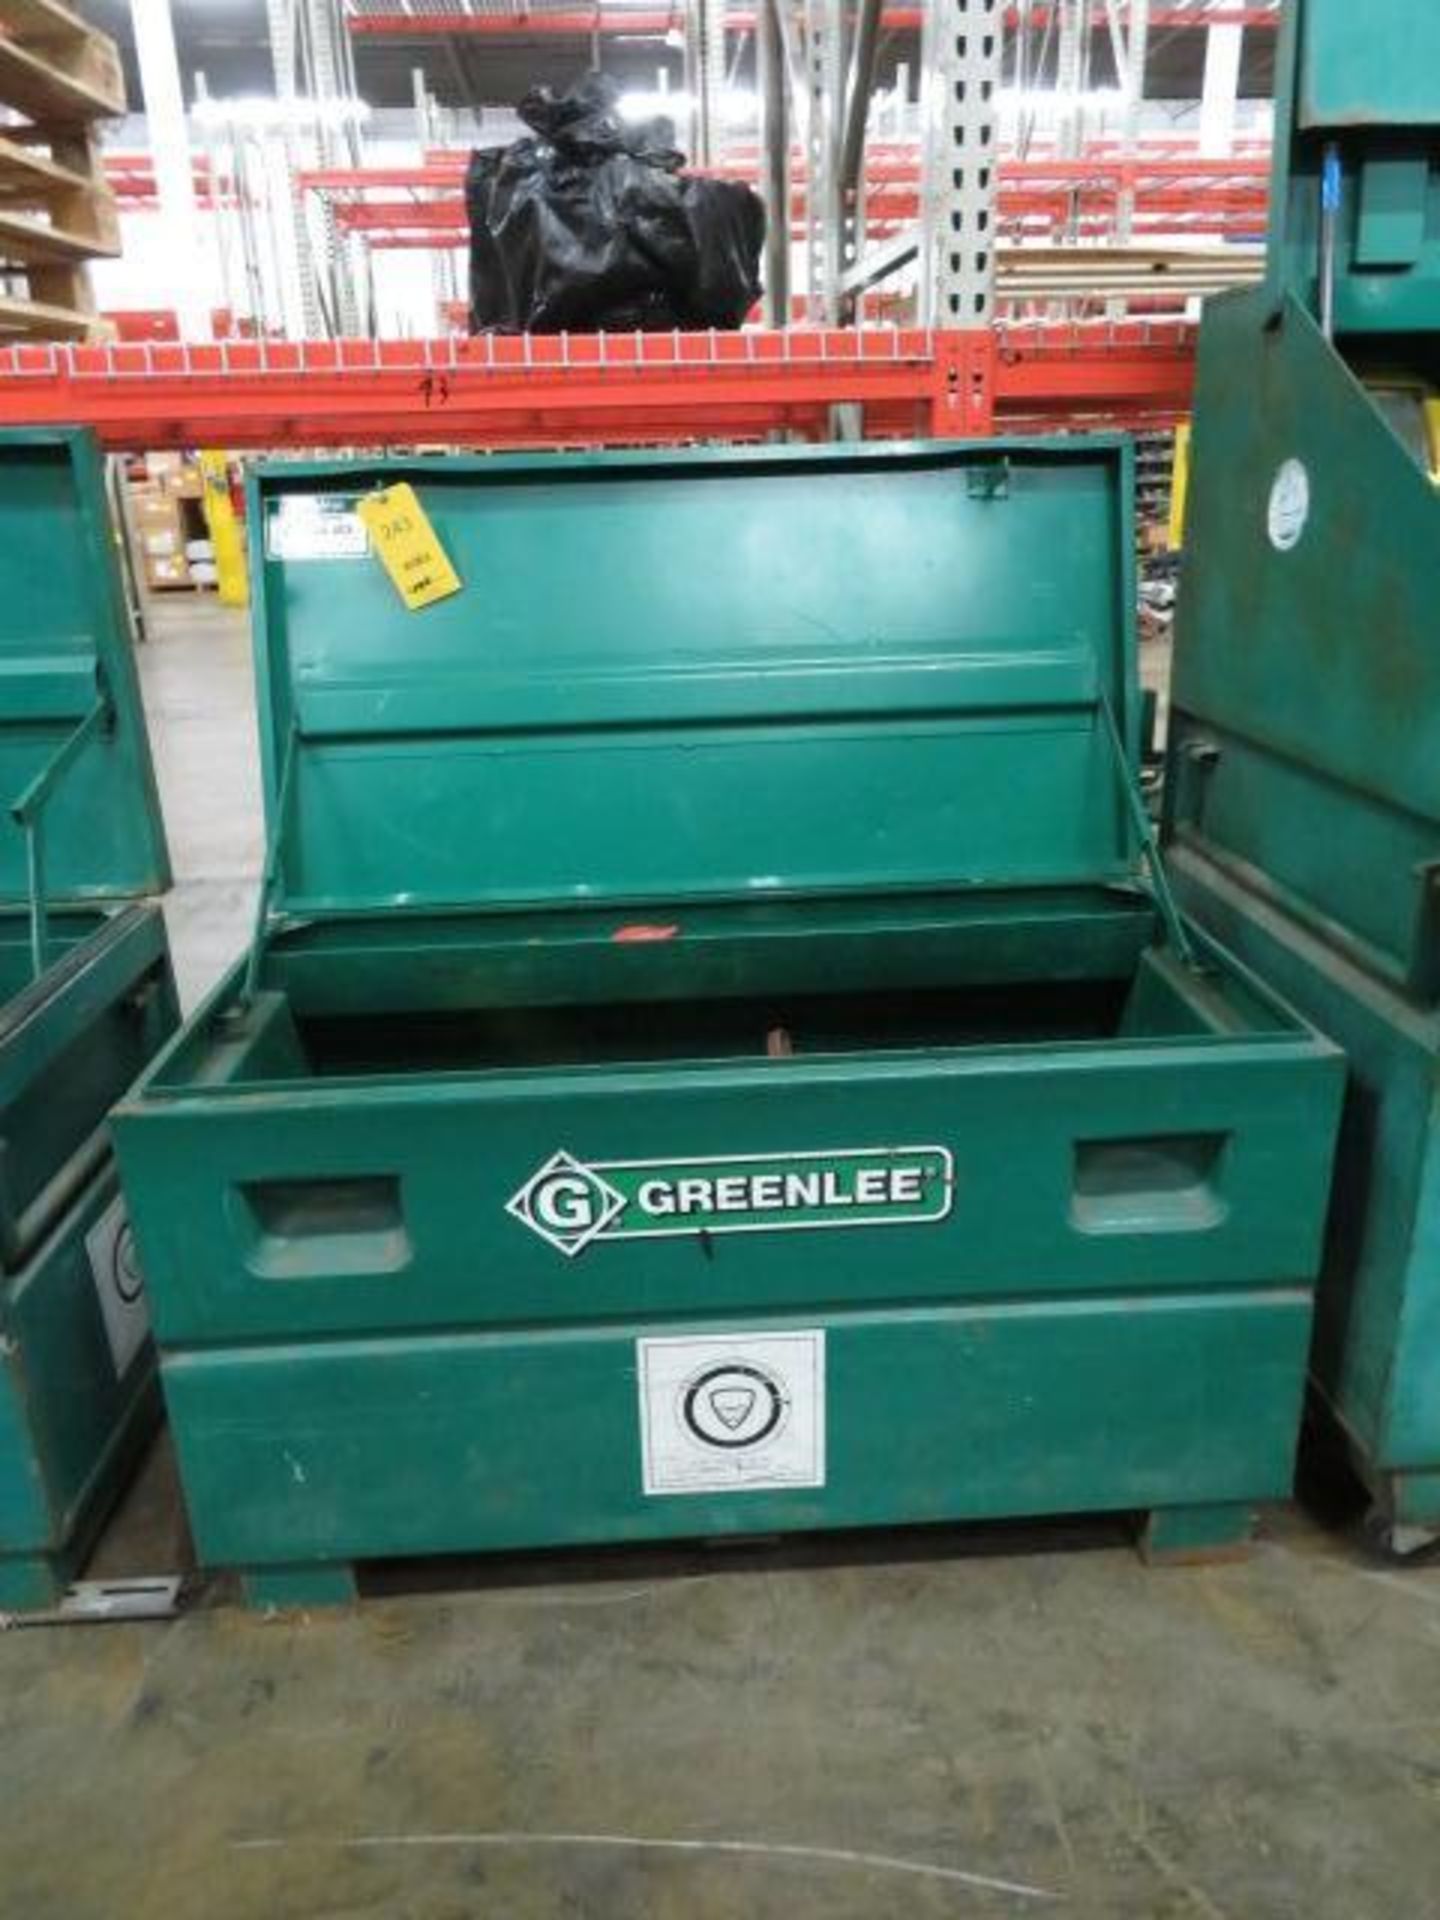 LOT: Greenlee Portable Storage Box No. 2448 with Contents of Lifting Accessories including Cable,